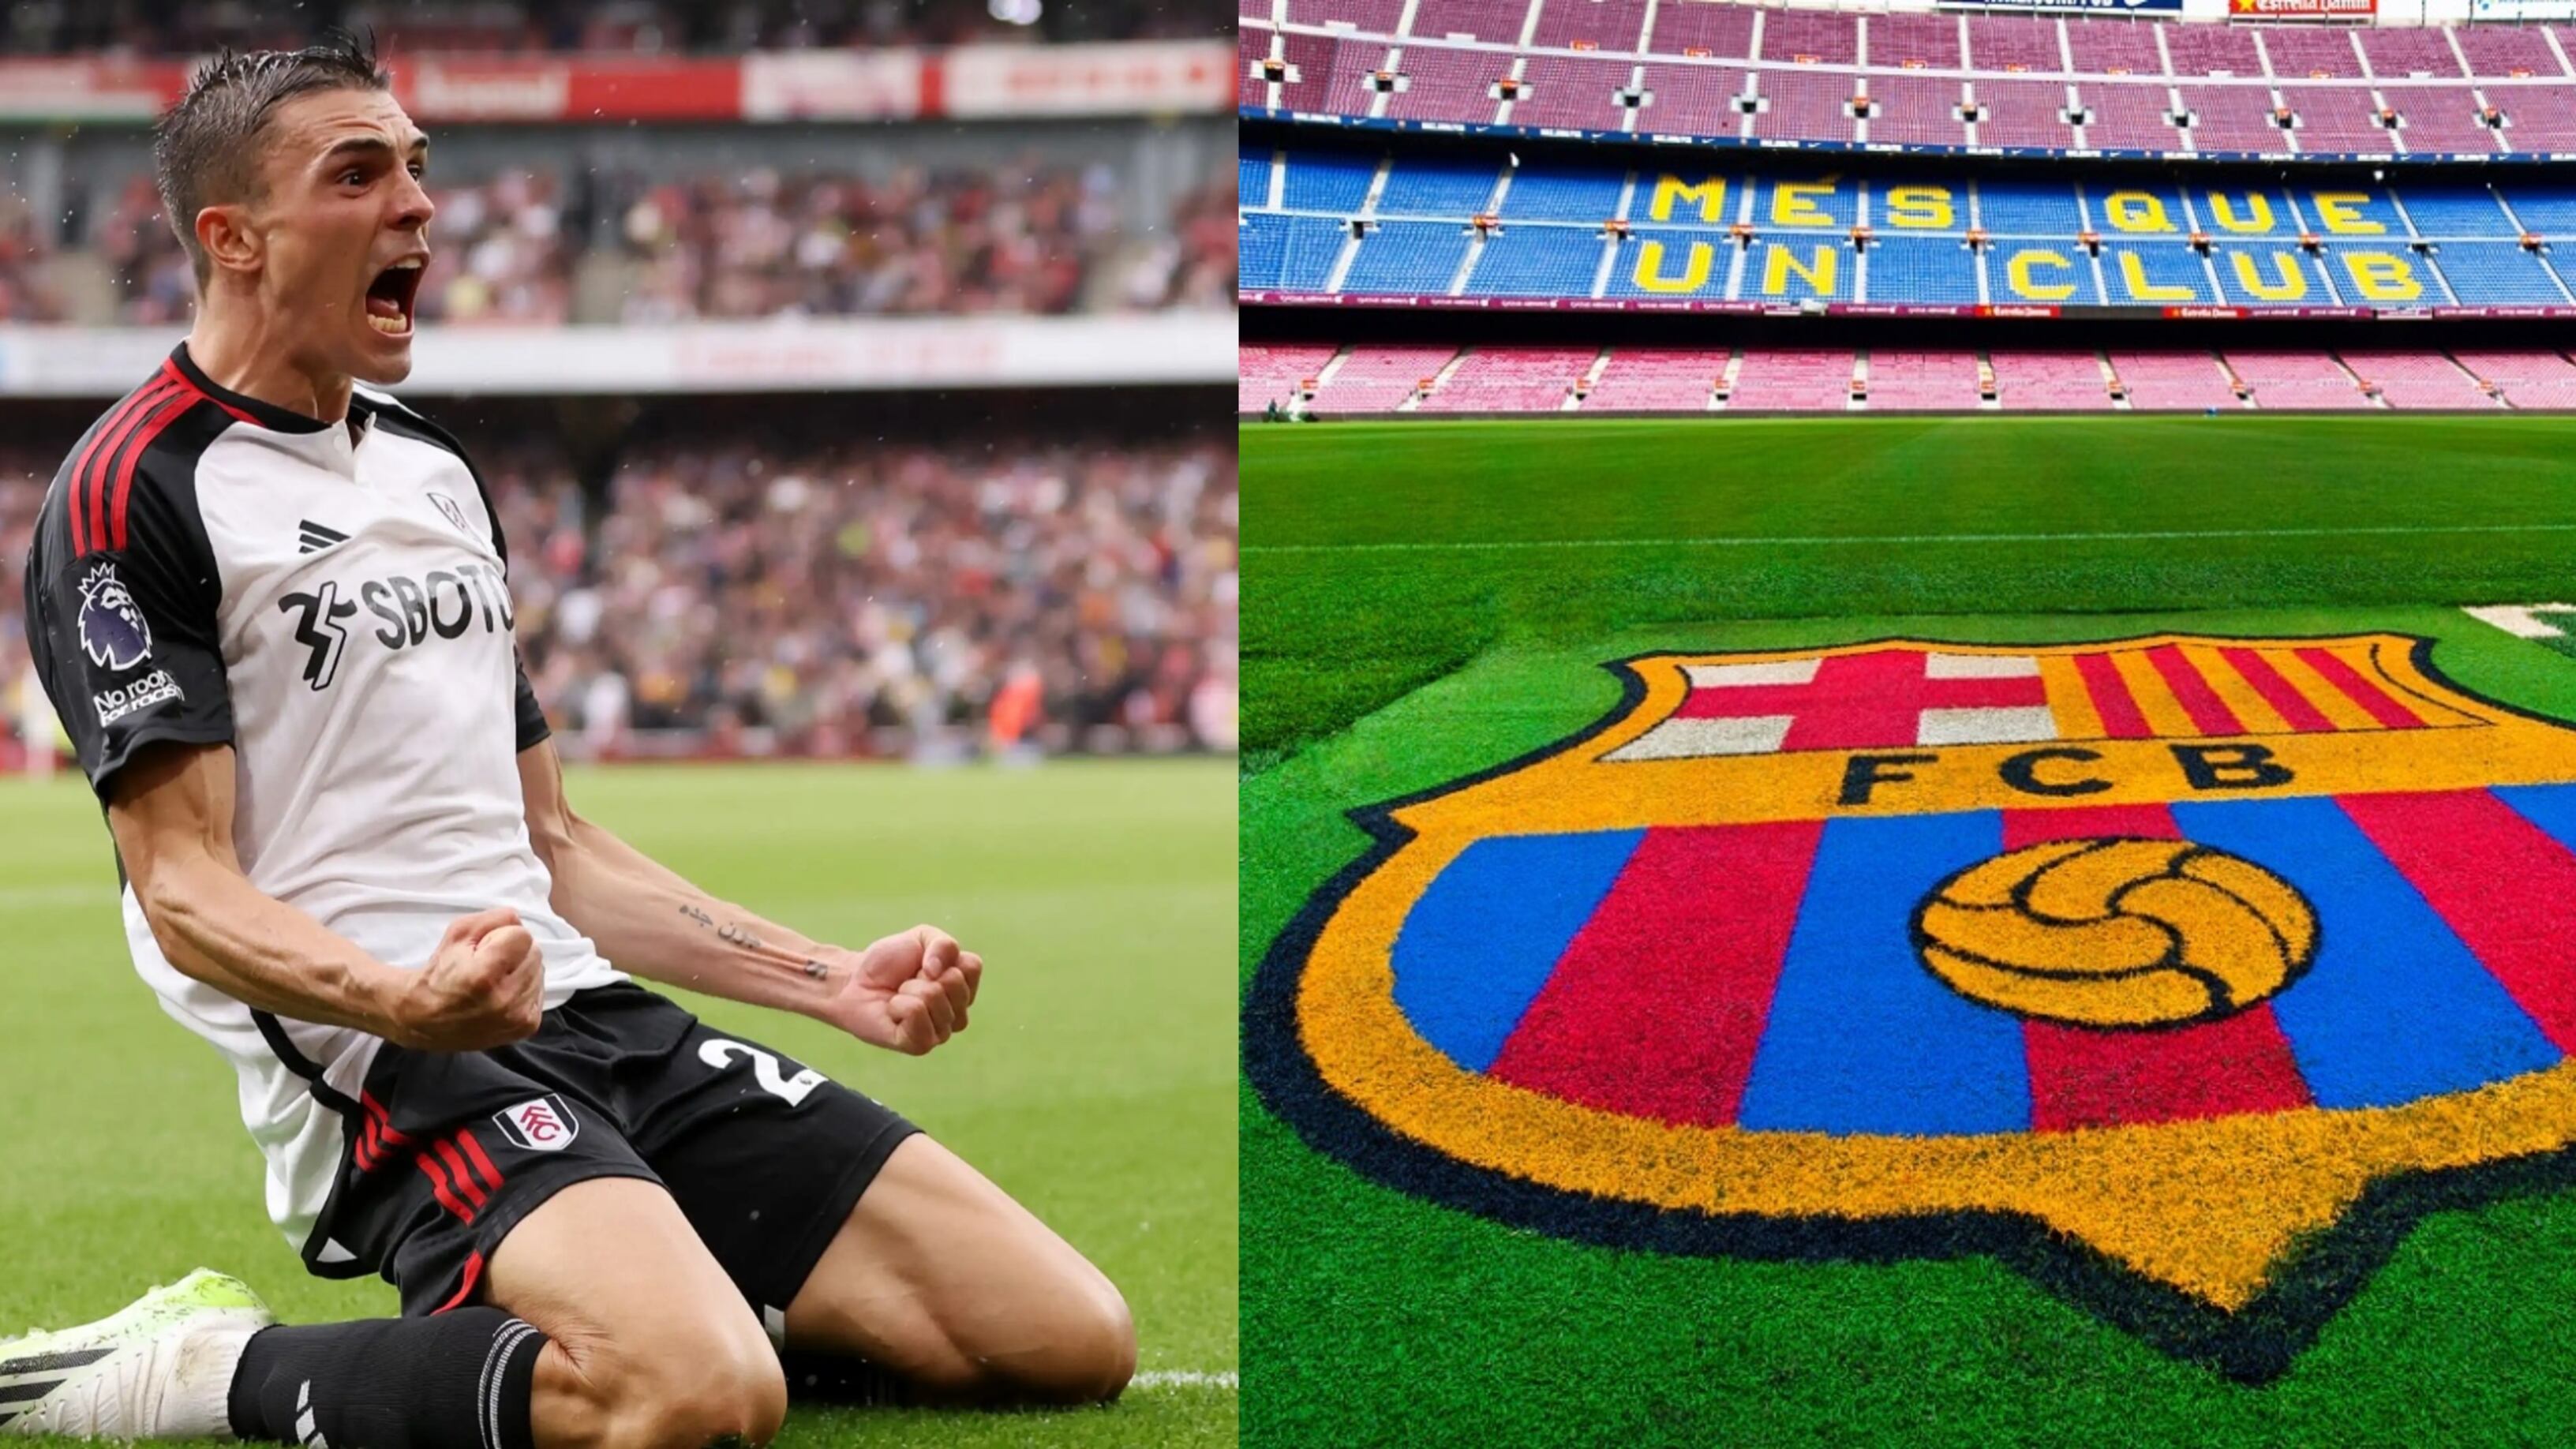 The $65 million star who shines in the Premier League and dreams of playing for Barcelona